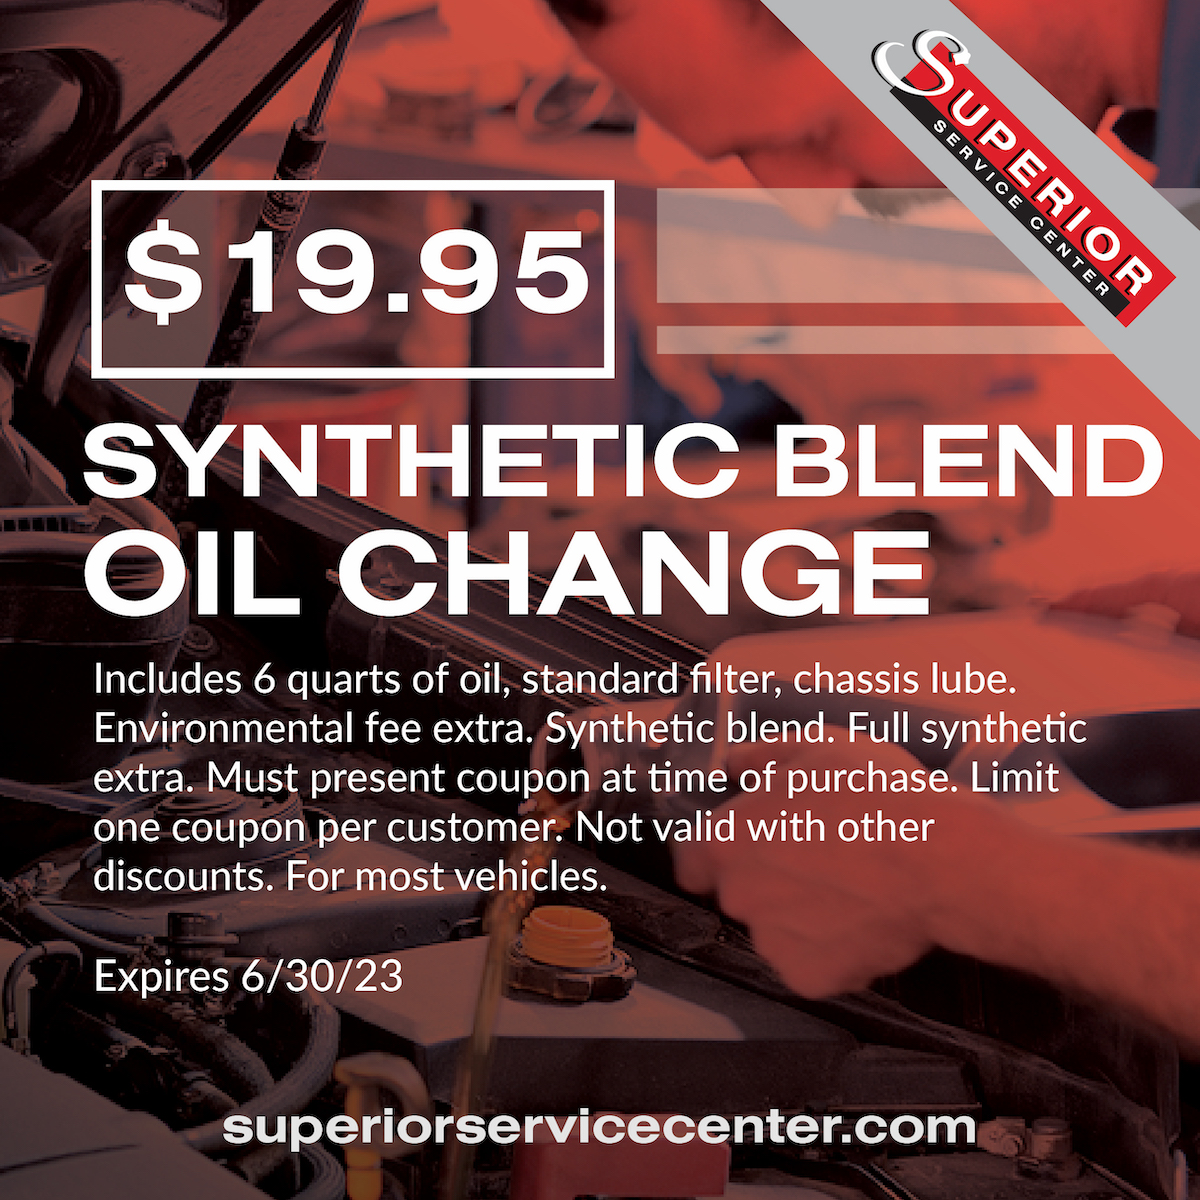 Is your vehicle due for an oil change? Don't let dirty oil hinder your ride's performance. Bring it to our trusted auto shop for a top-notch oil change experience! 

#oilchange #syntheticoil #fullsyntheticoil #superiorservice